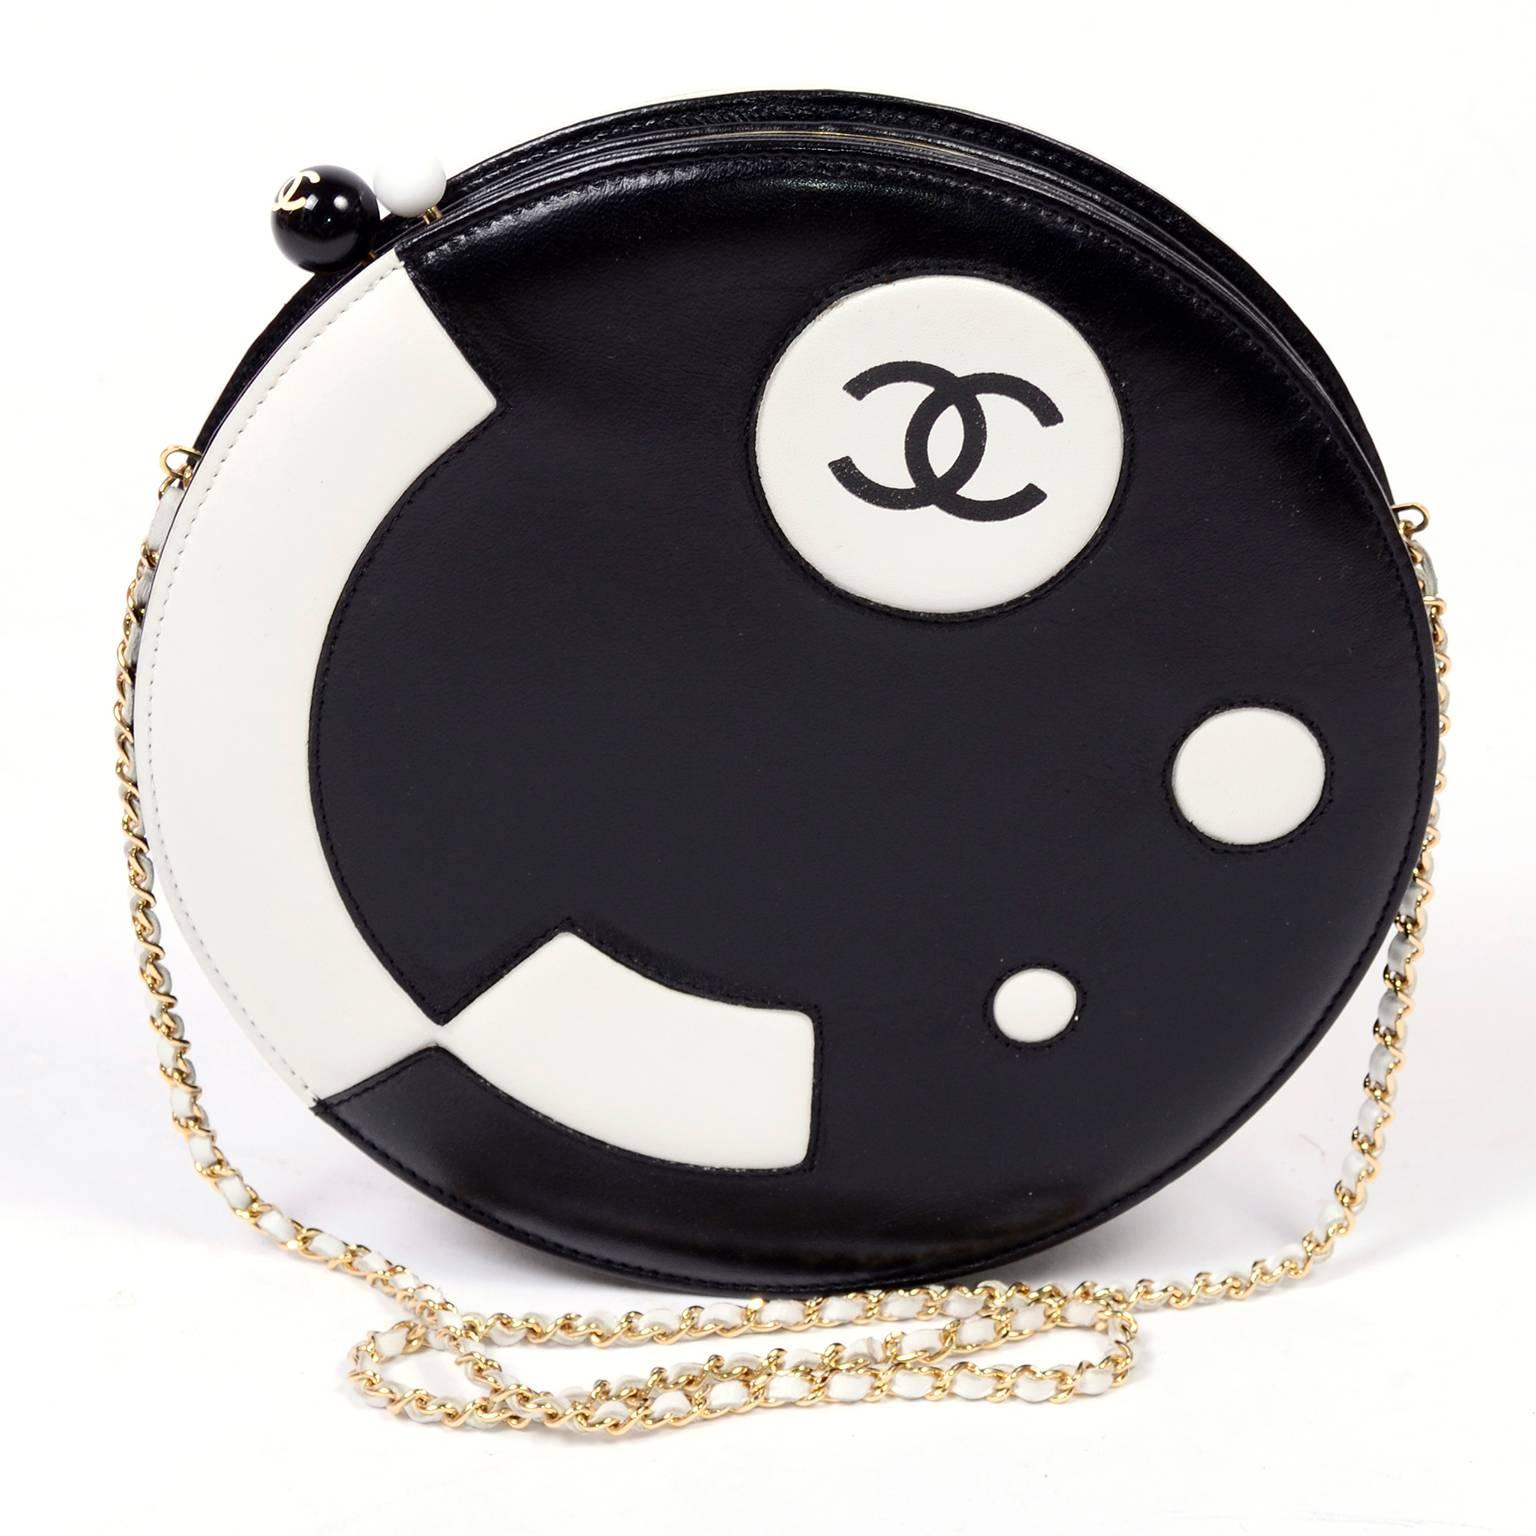 This gorgeous Chanel Shoulder bag is stunning with its modern futuristic pattern and circular shape.  This high contrast round black and white lambskin leather handbag is from Chanel's 2003 - 2004 collection. You can wear this handbag as a shoulder